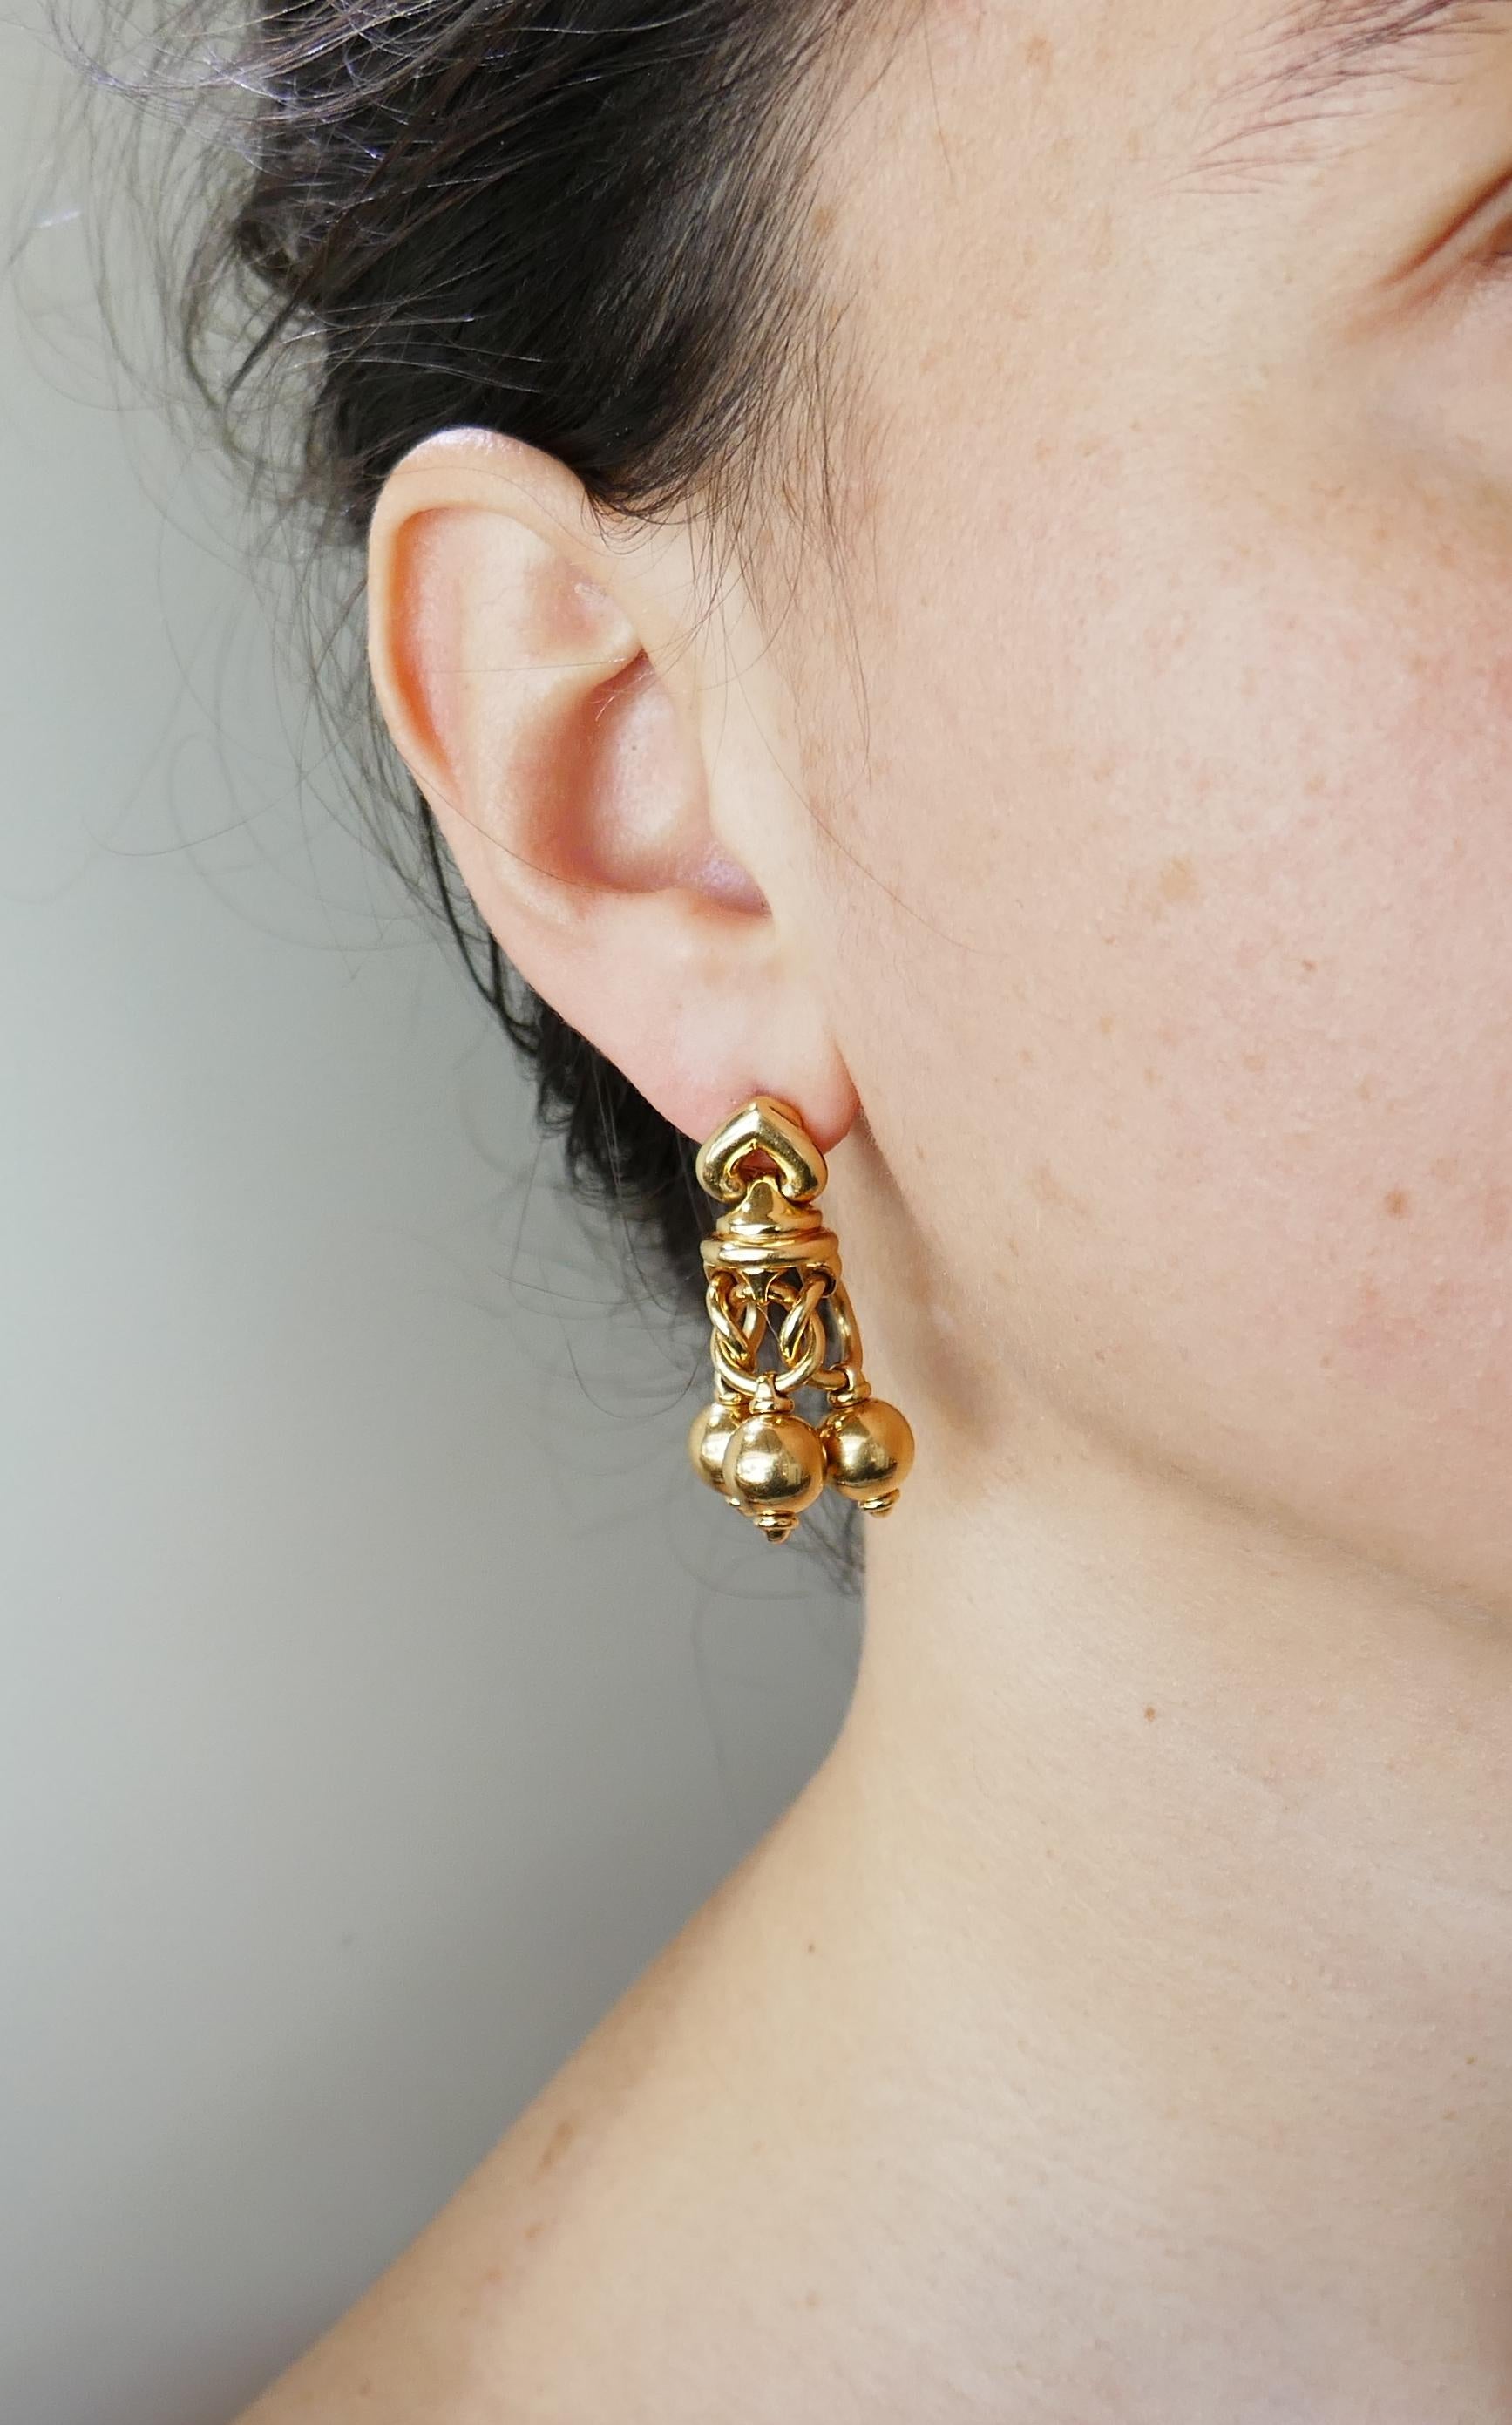 Classy dangle earrings created by Bvlgari in Italy in the 1980s. Elegant, timeless and wearable,  the earrings are a great addition to your jewelry collection. 
The earrings are made of 18 karat (stamped) yellow gold.
The earrings measure 1-1/4 x